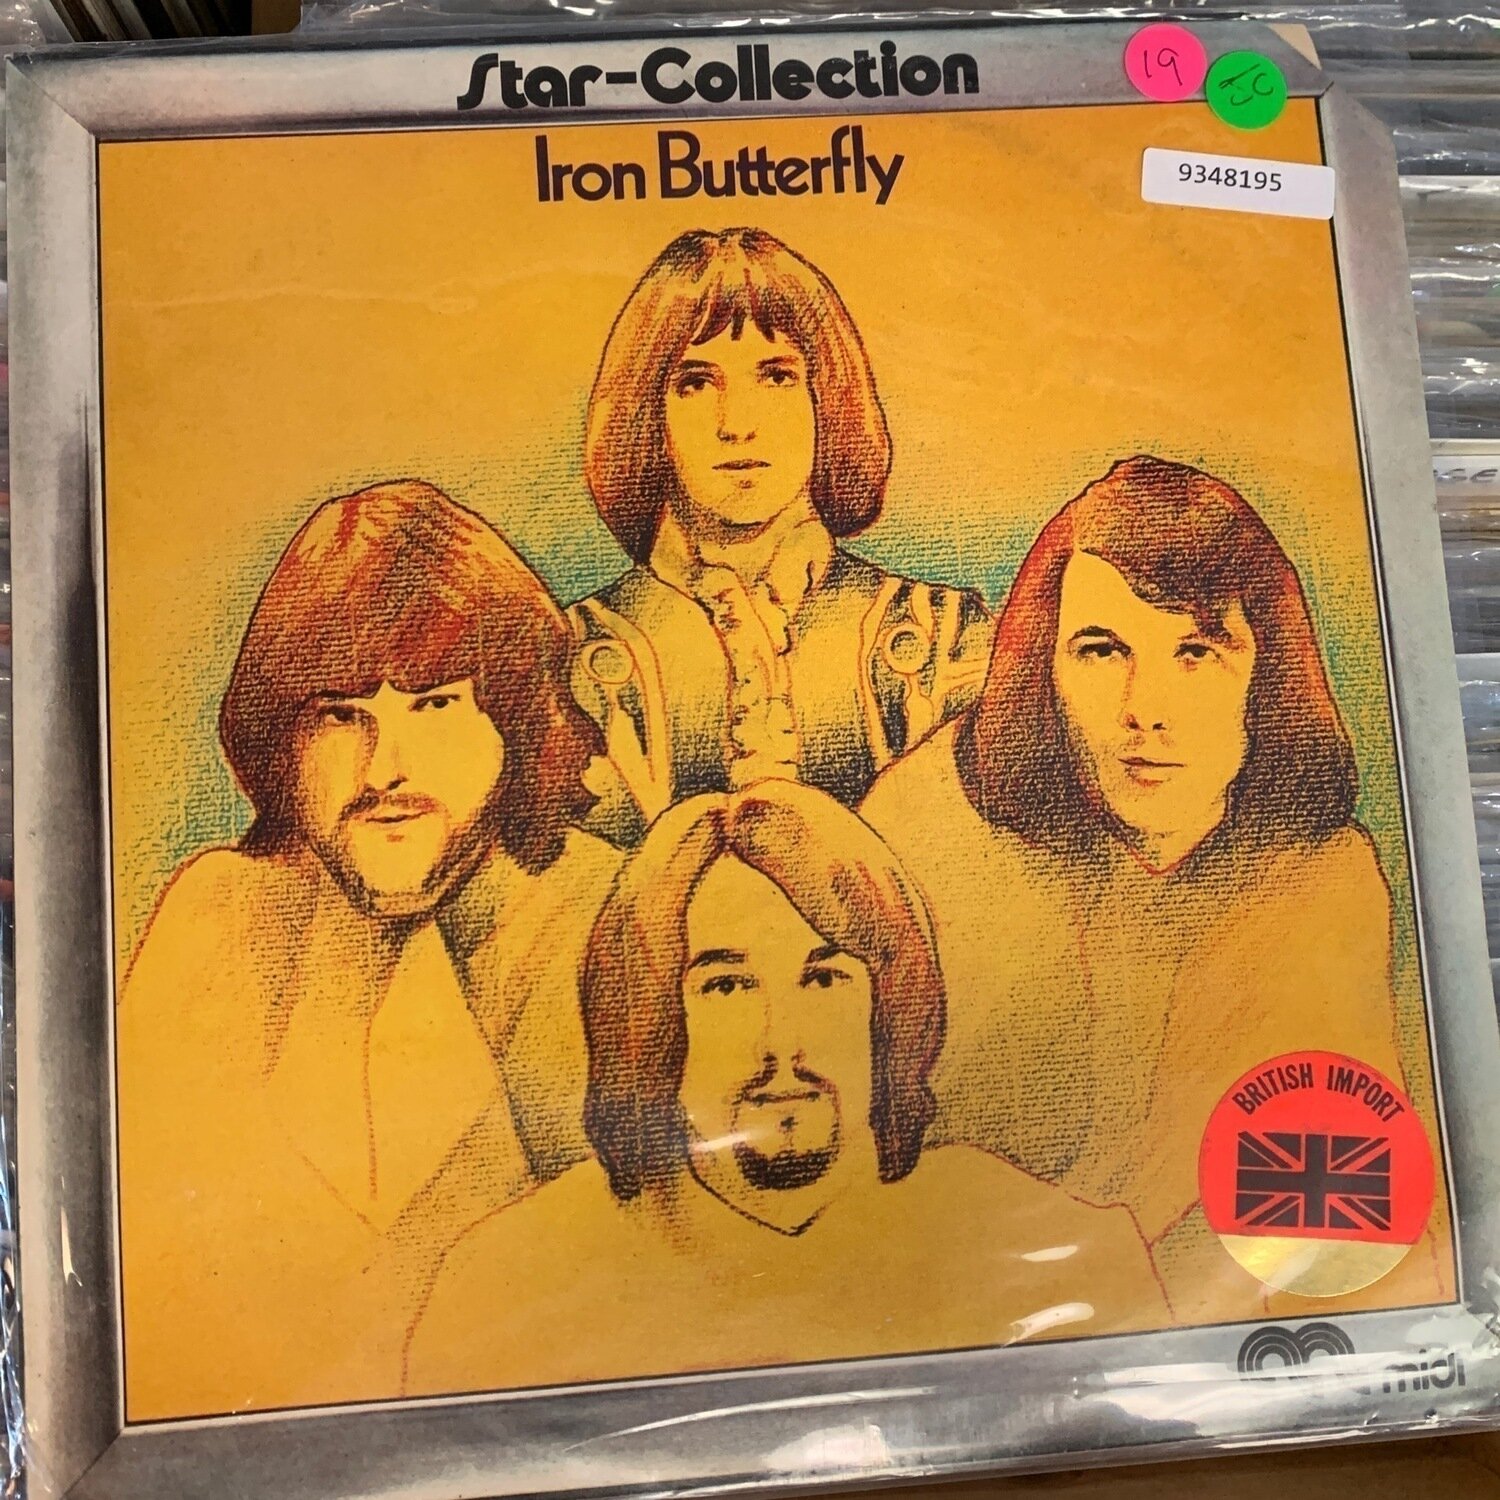 Iron Butterfly - Star-Collection British Import